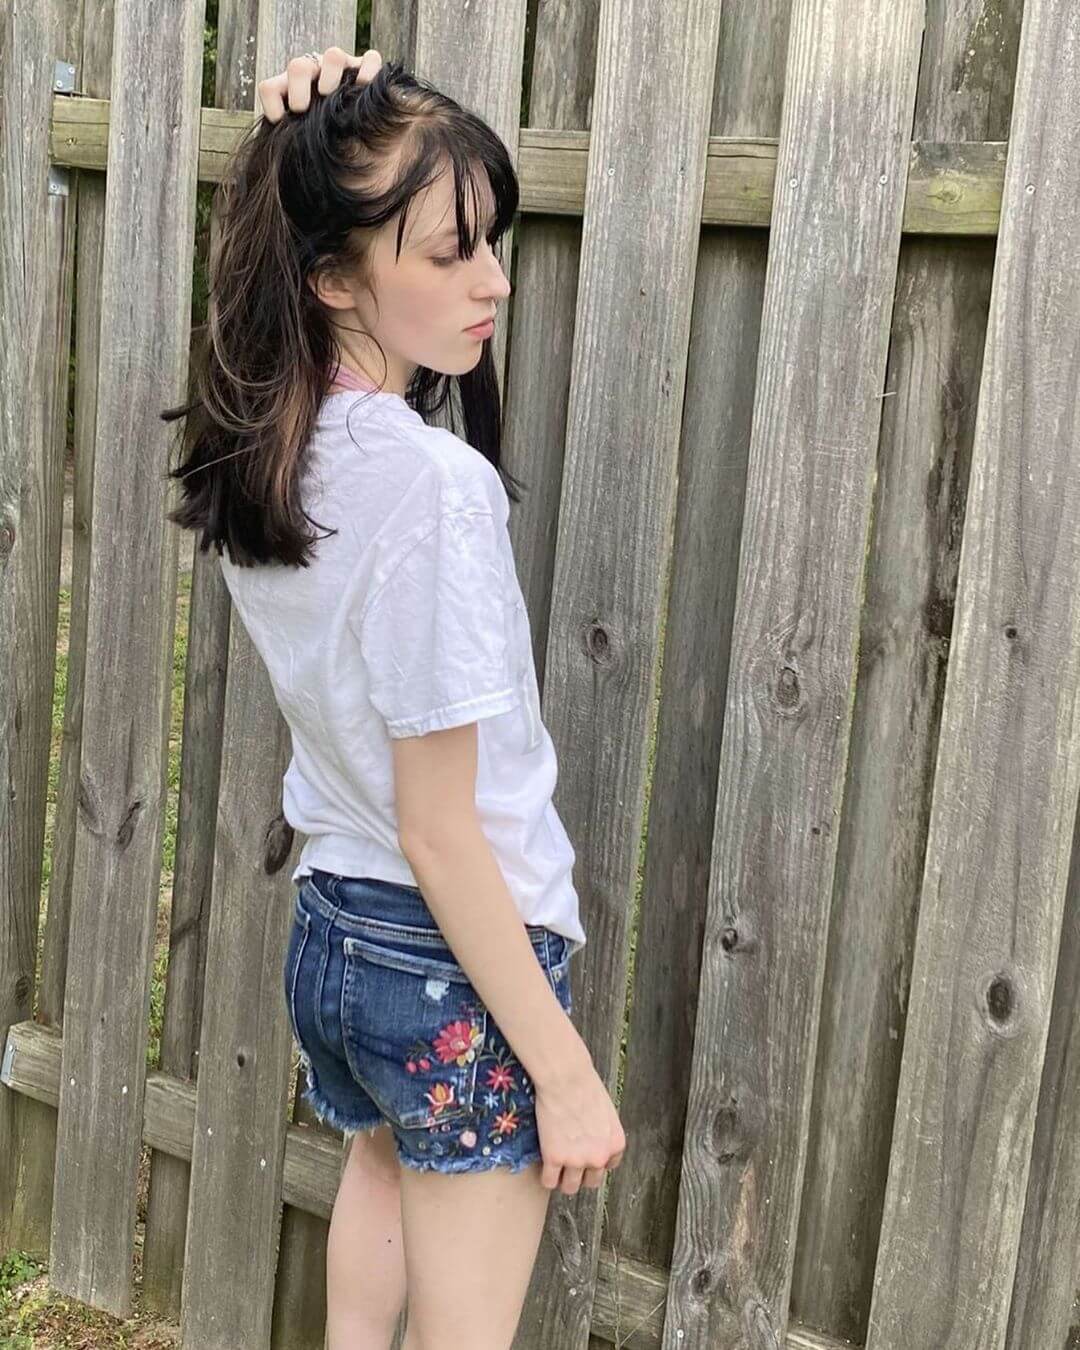 A teenage girl in embroidered short shorts